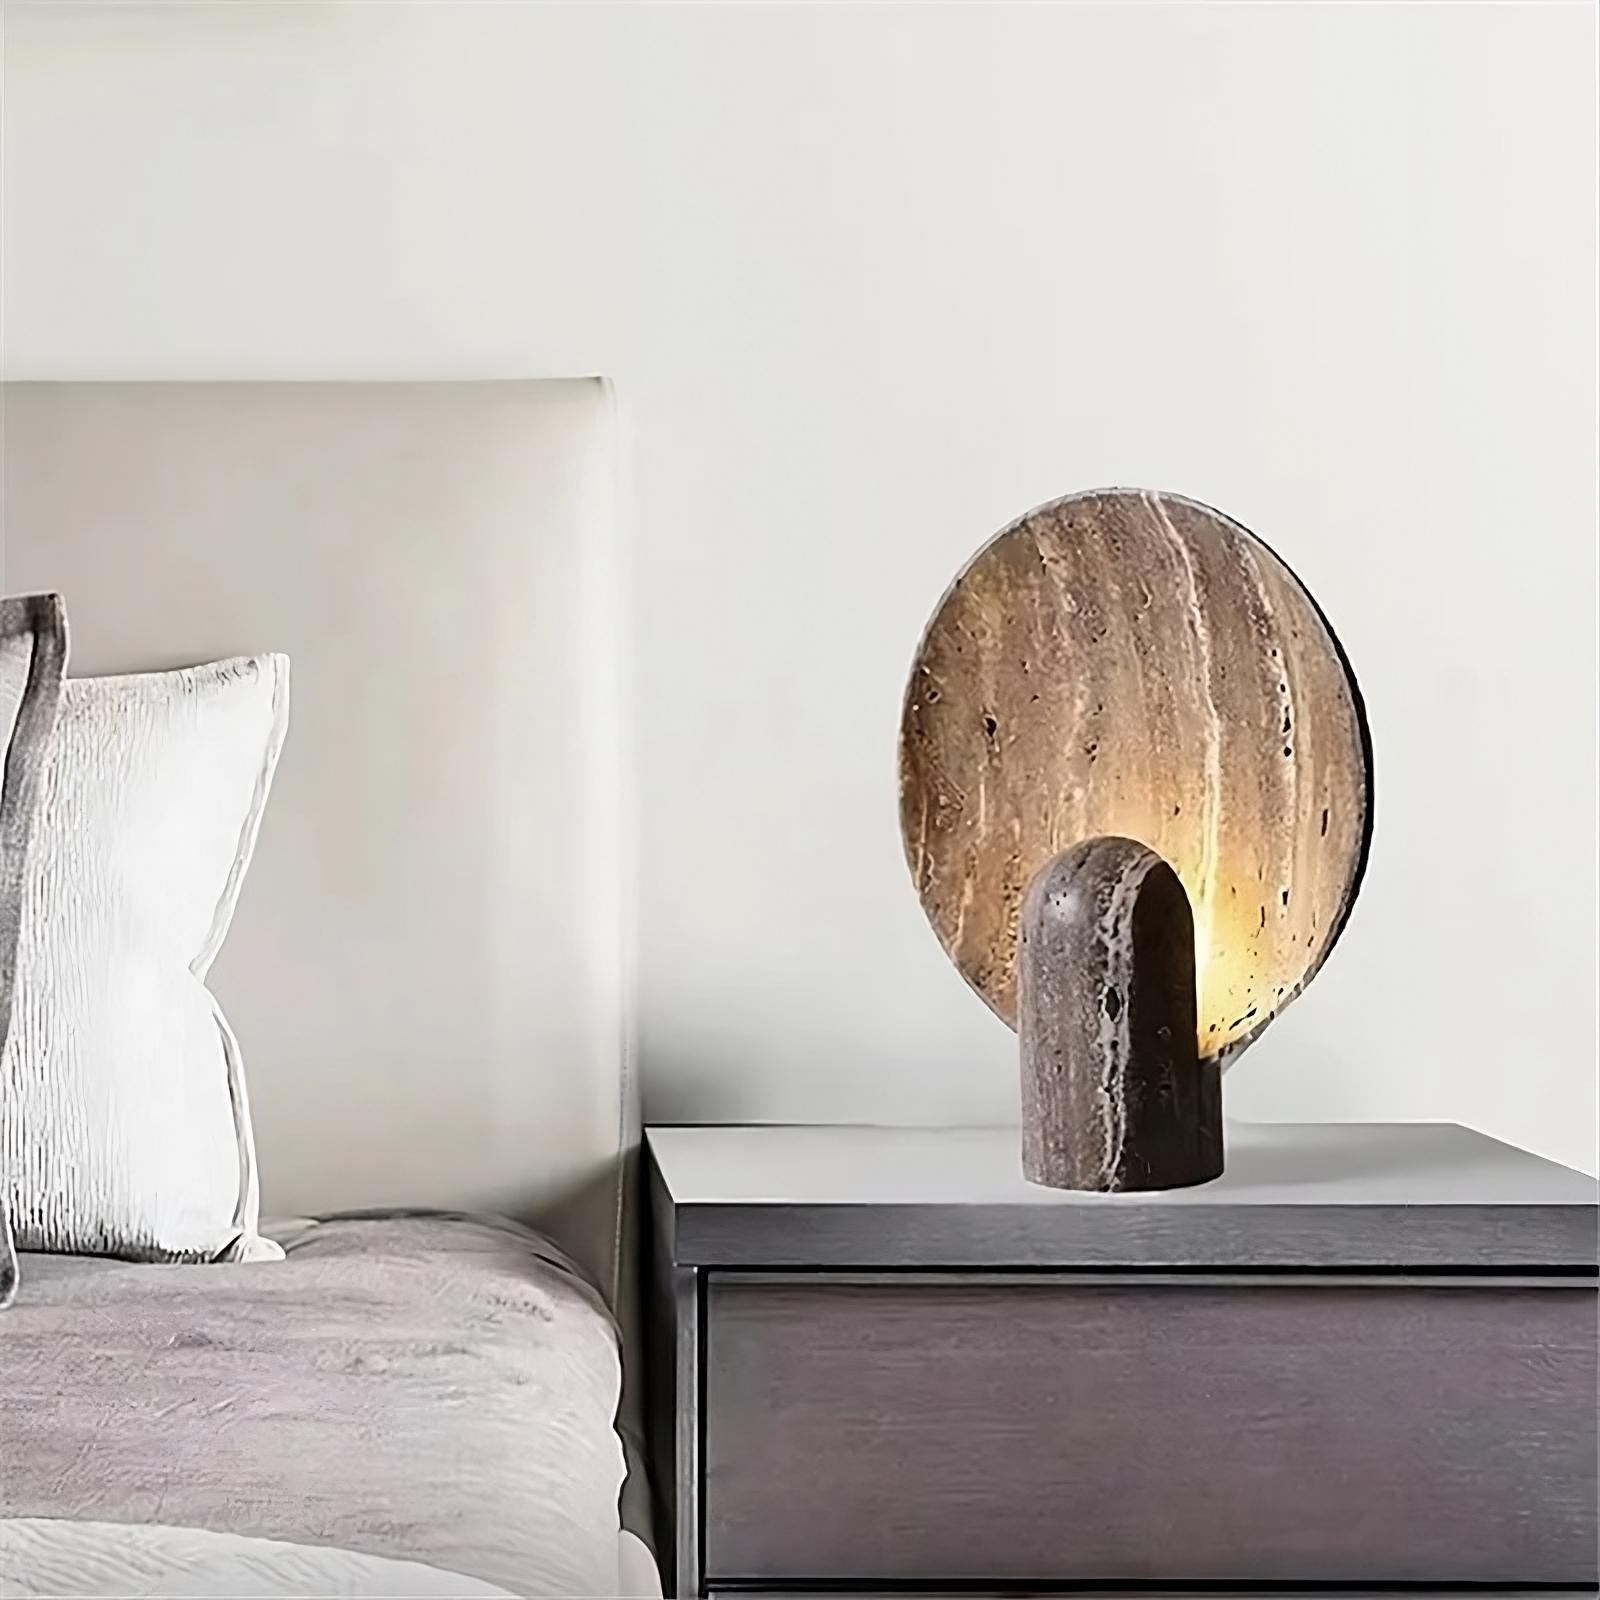 A modern bedroom features a gray cushioned headboard and white pillows on the bed. Beside the bed is a dark wooden nightstand with a unique circular Morsale Natural Travertine Table Lamp emitting warm light, creating a cozy atmosphere. The lamp's adjustable brightness adds to the room's vintage design charm.